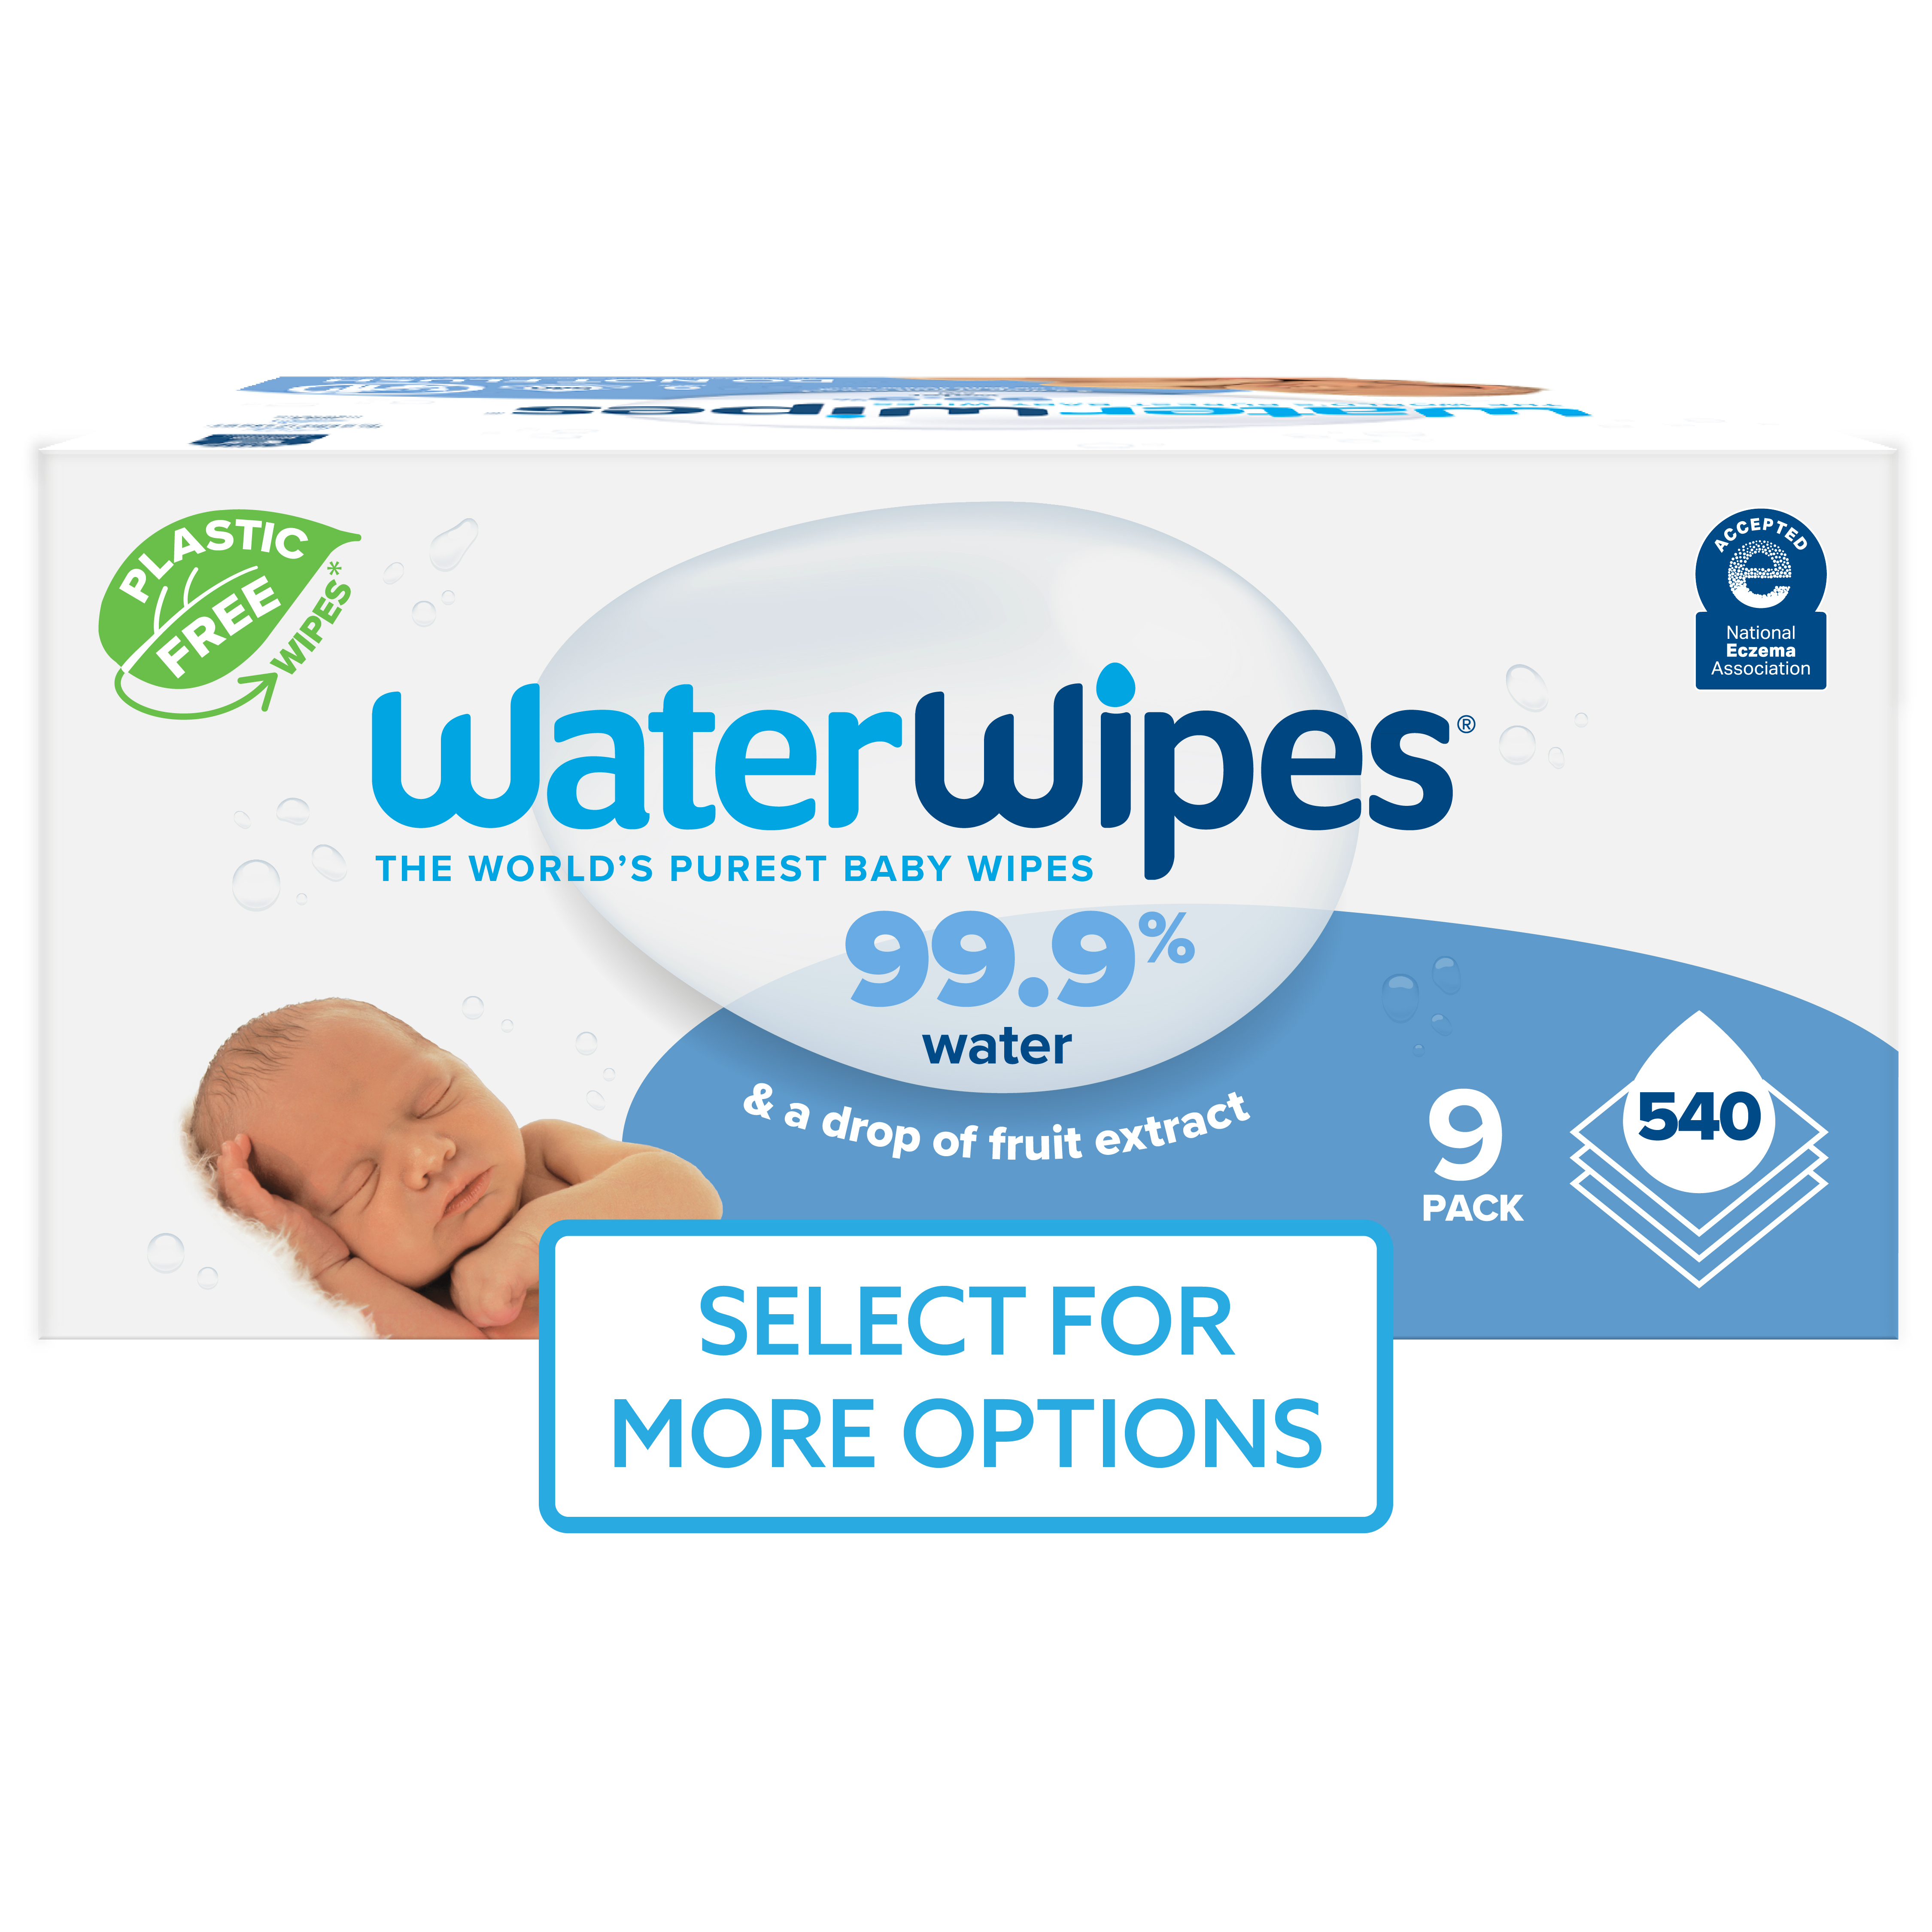 WaterWipes Plastic-Free Original 99.9% Water Based Baby Wipes, Fragrance-Free for Sensitive Skin, 540 Count (9 Packs) - image 1 of 10